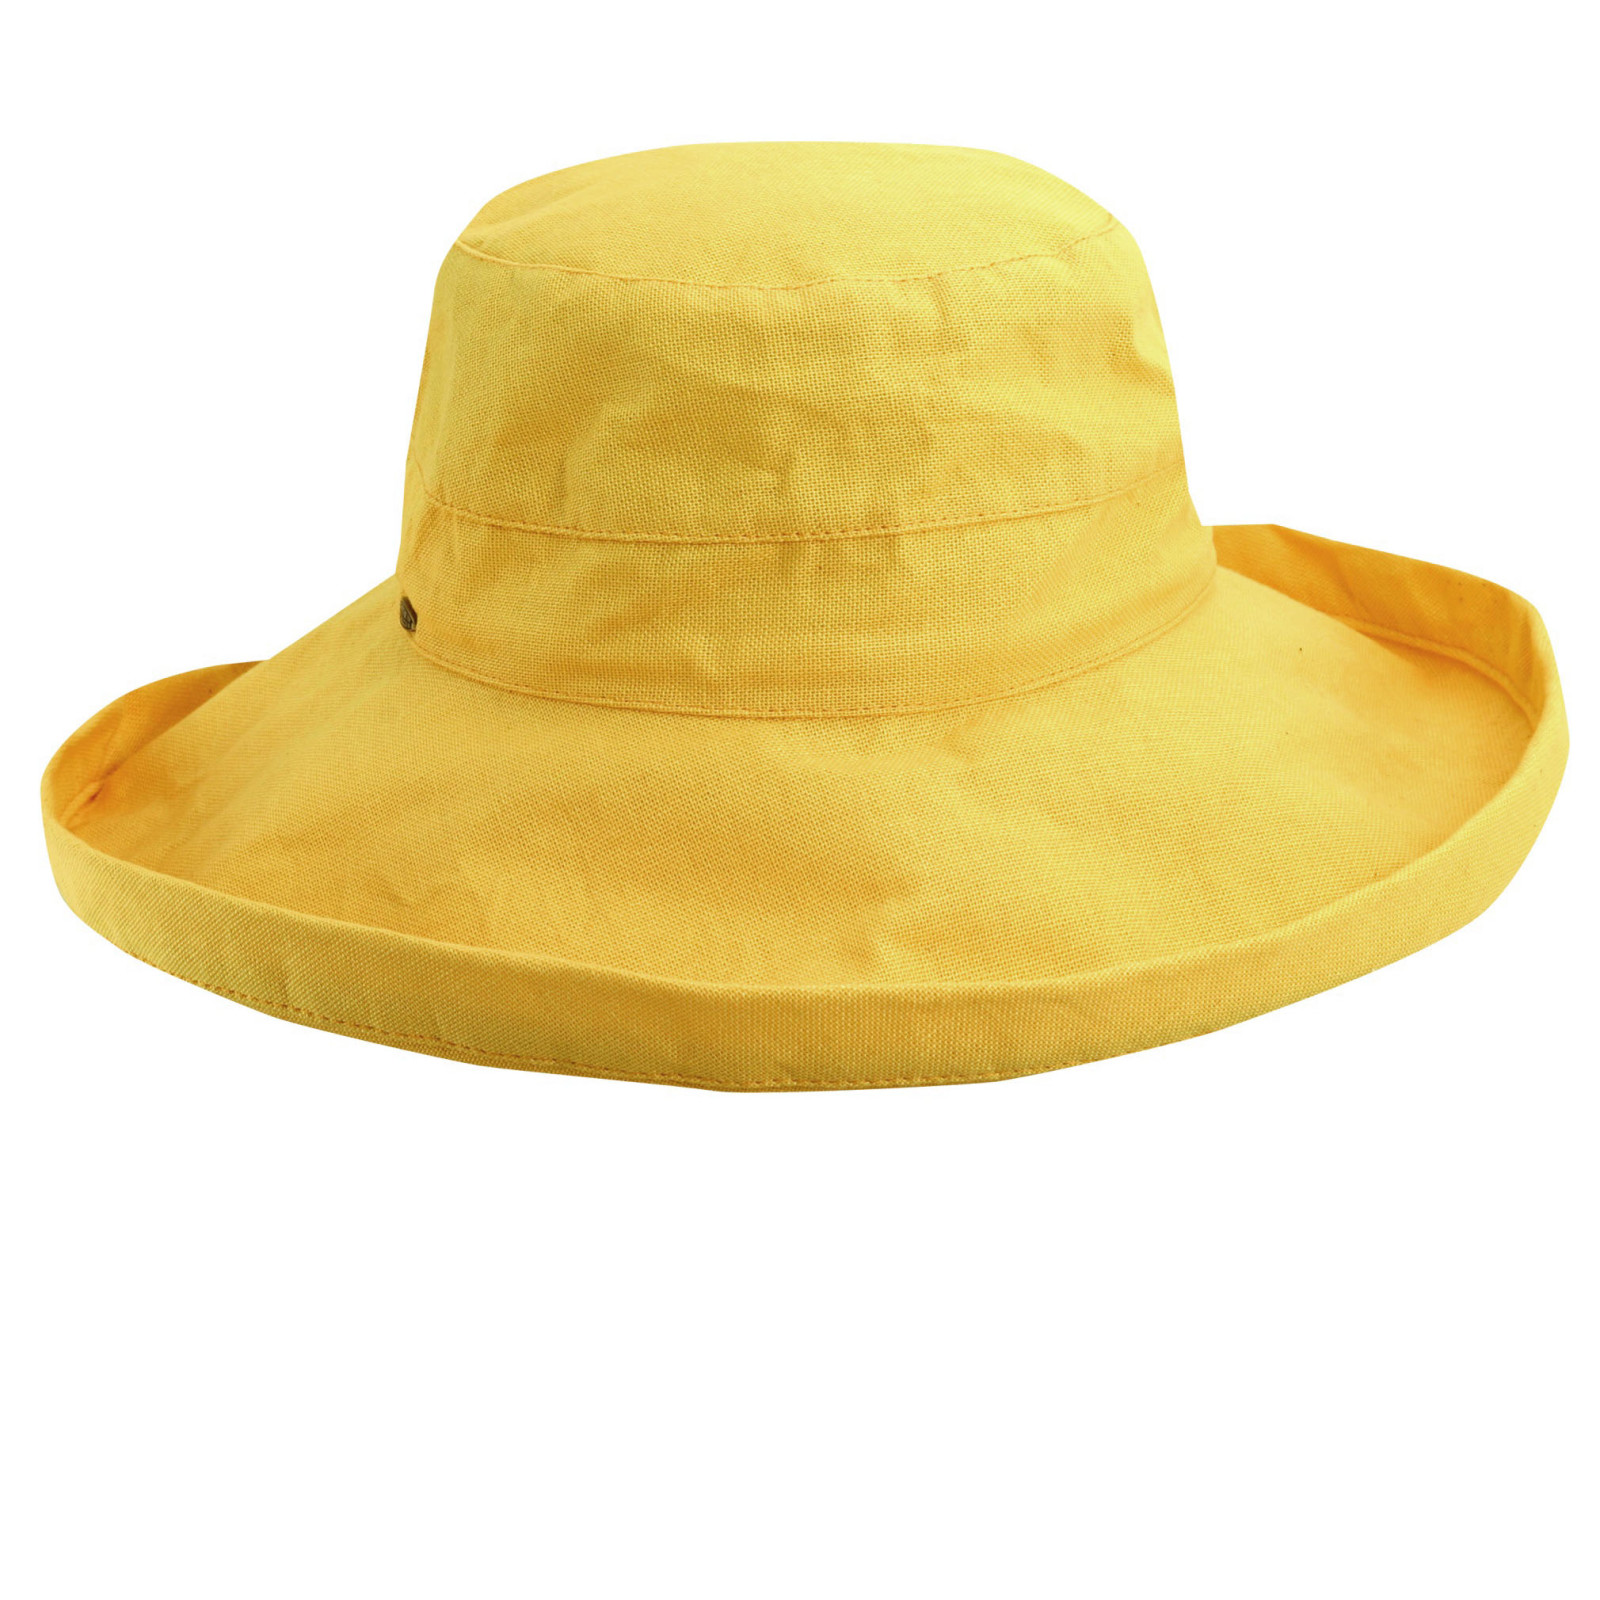 Cotton Sunhat with 3 inch Brim